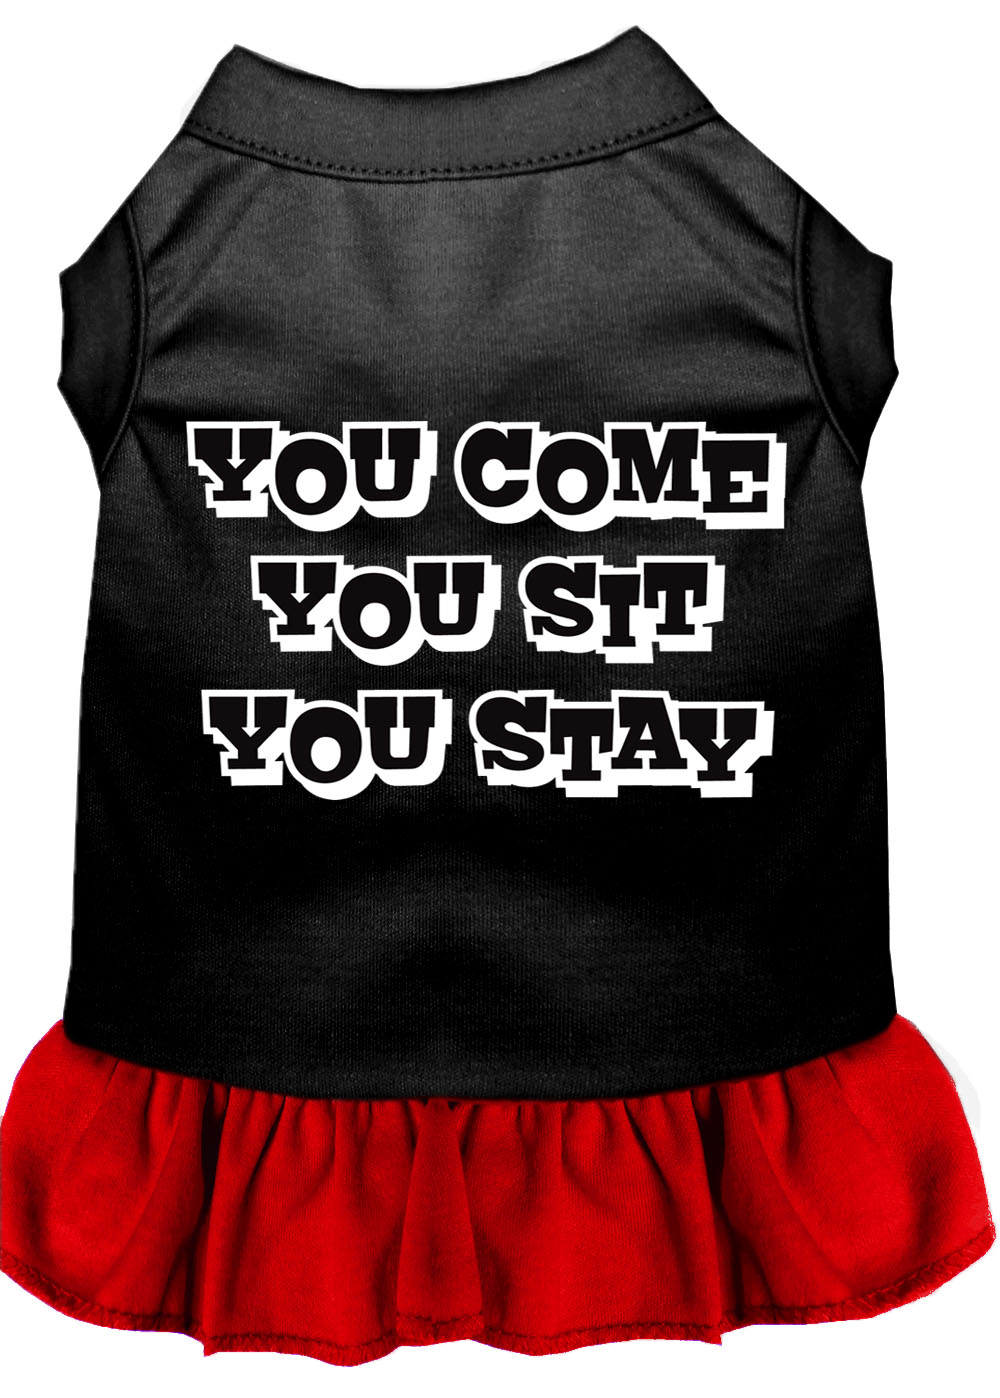 You Come, You Sit, You Stay Screen Print Dress Black With Red Xxxl GreatEagleInc